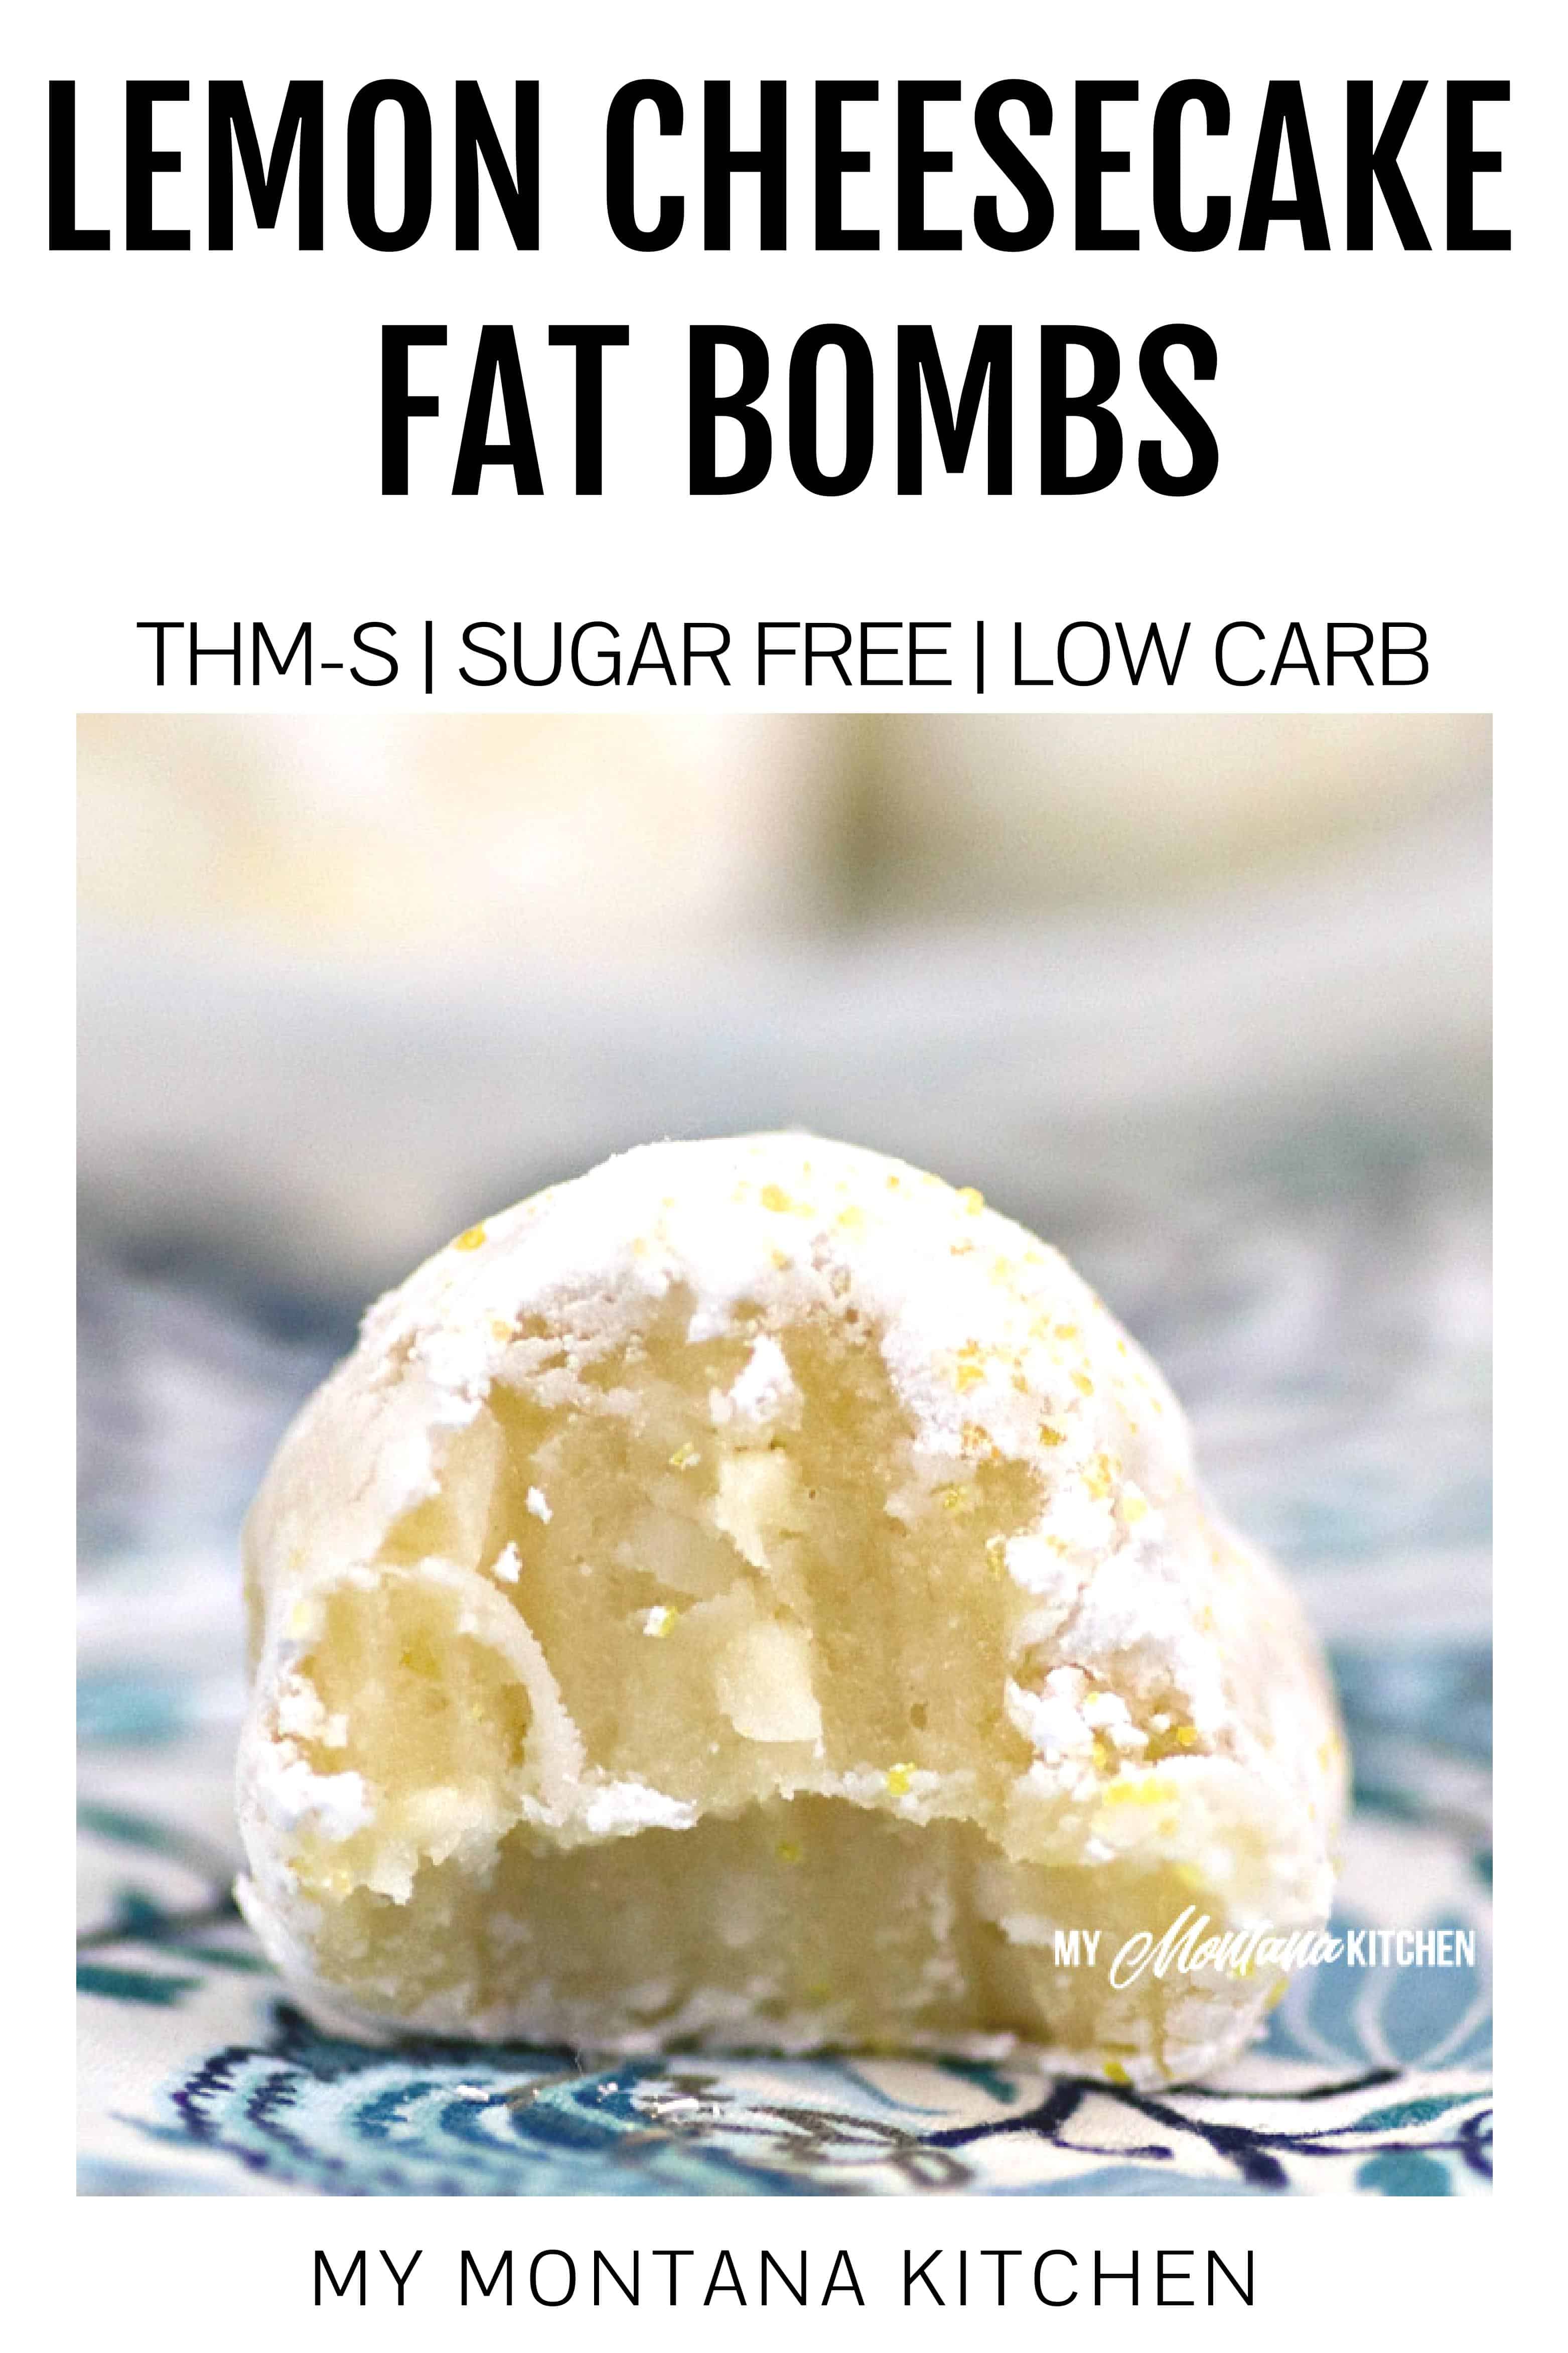 Lemon cheesecake keto fat bombs are a delicious and incredibly decadent way to get healthy fats into your body and stay eating well. This keto fat bombs recipe is about to become one of your all time favorite low carb lemon desserts! #ketolemon #lowcarbcheesecake